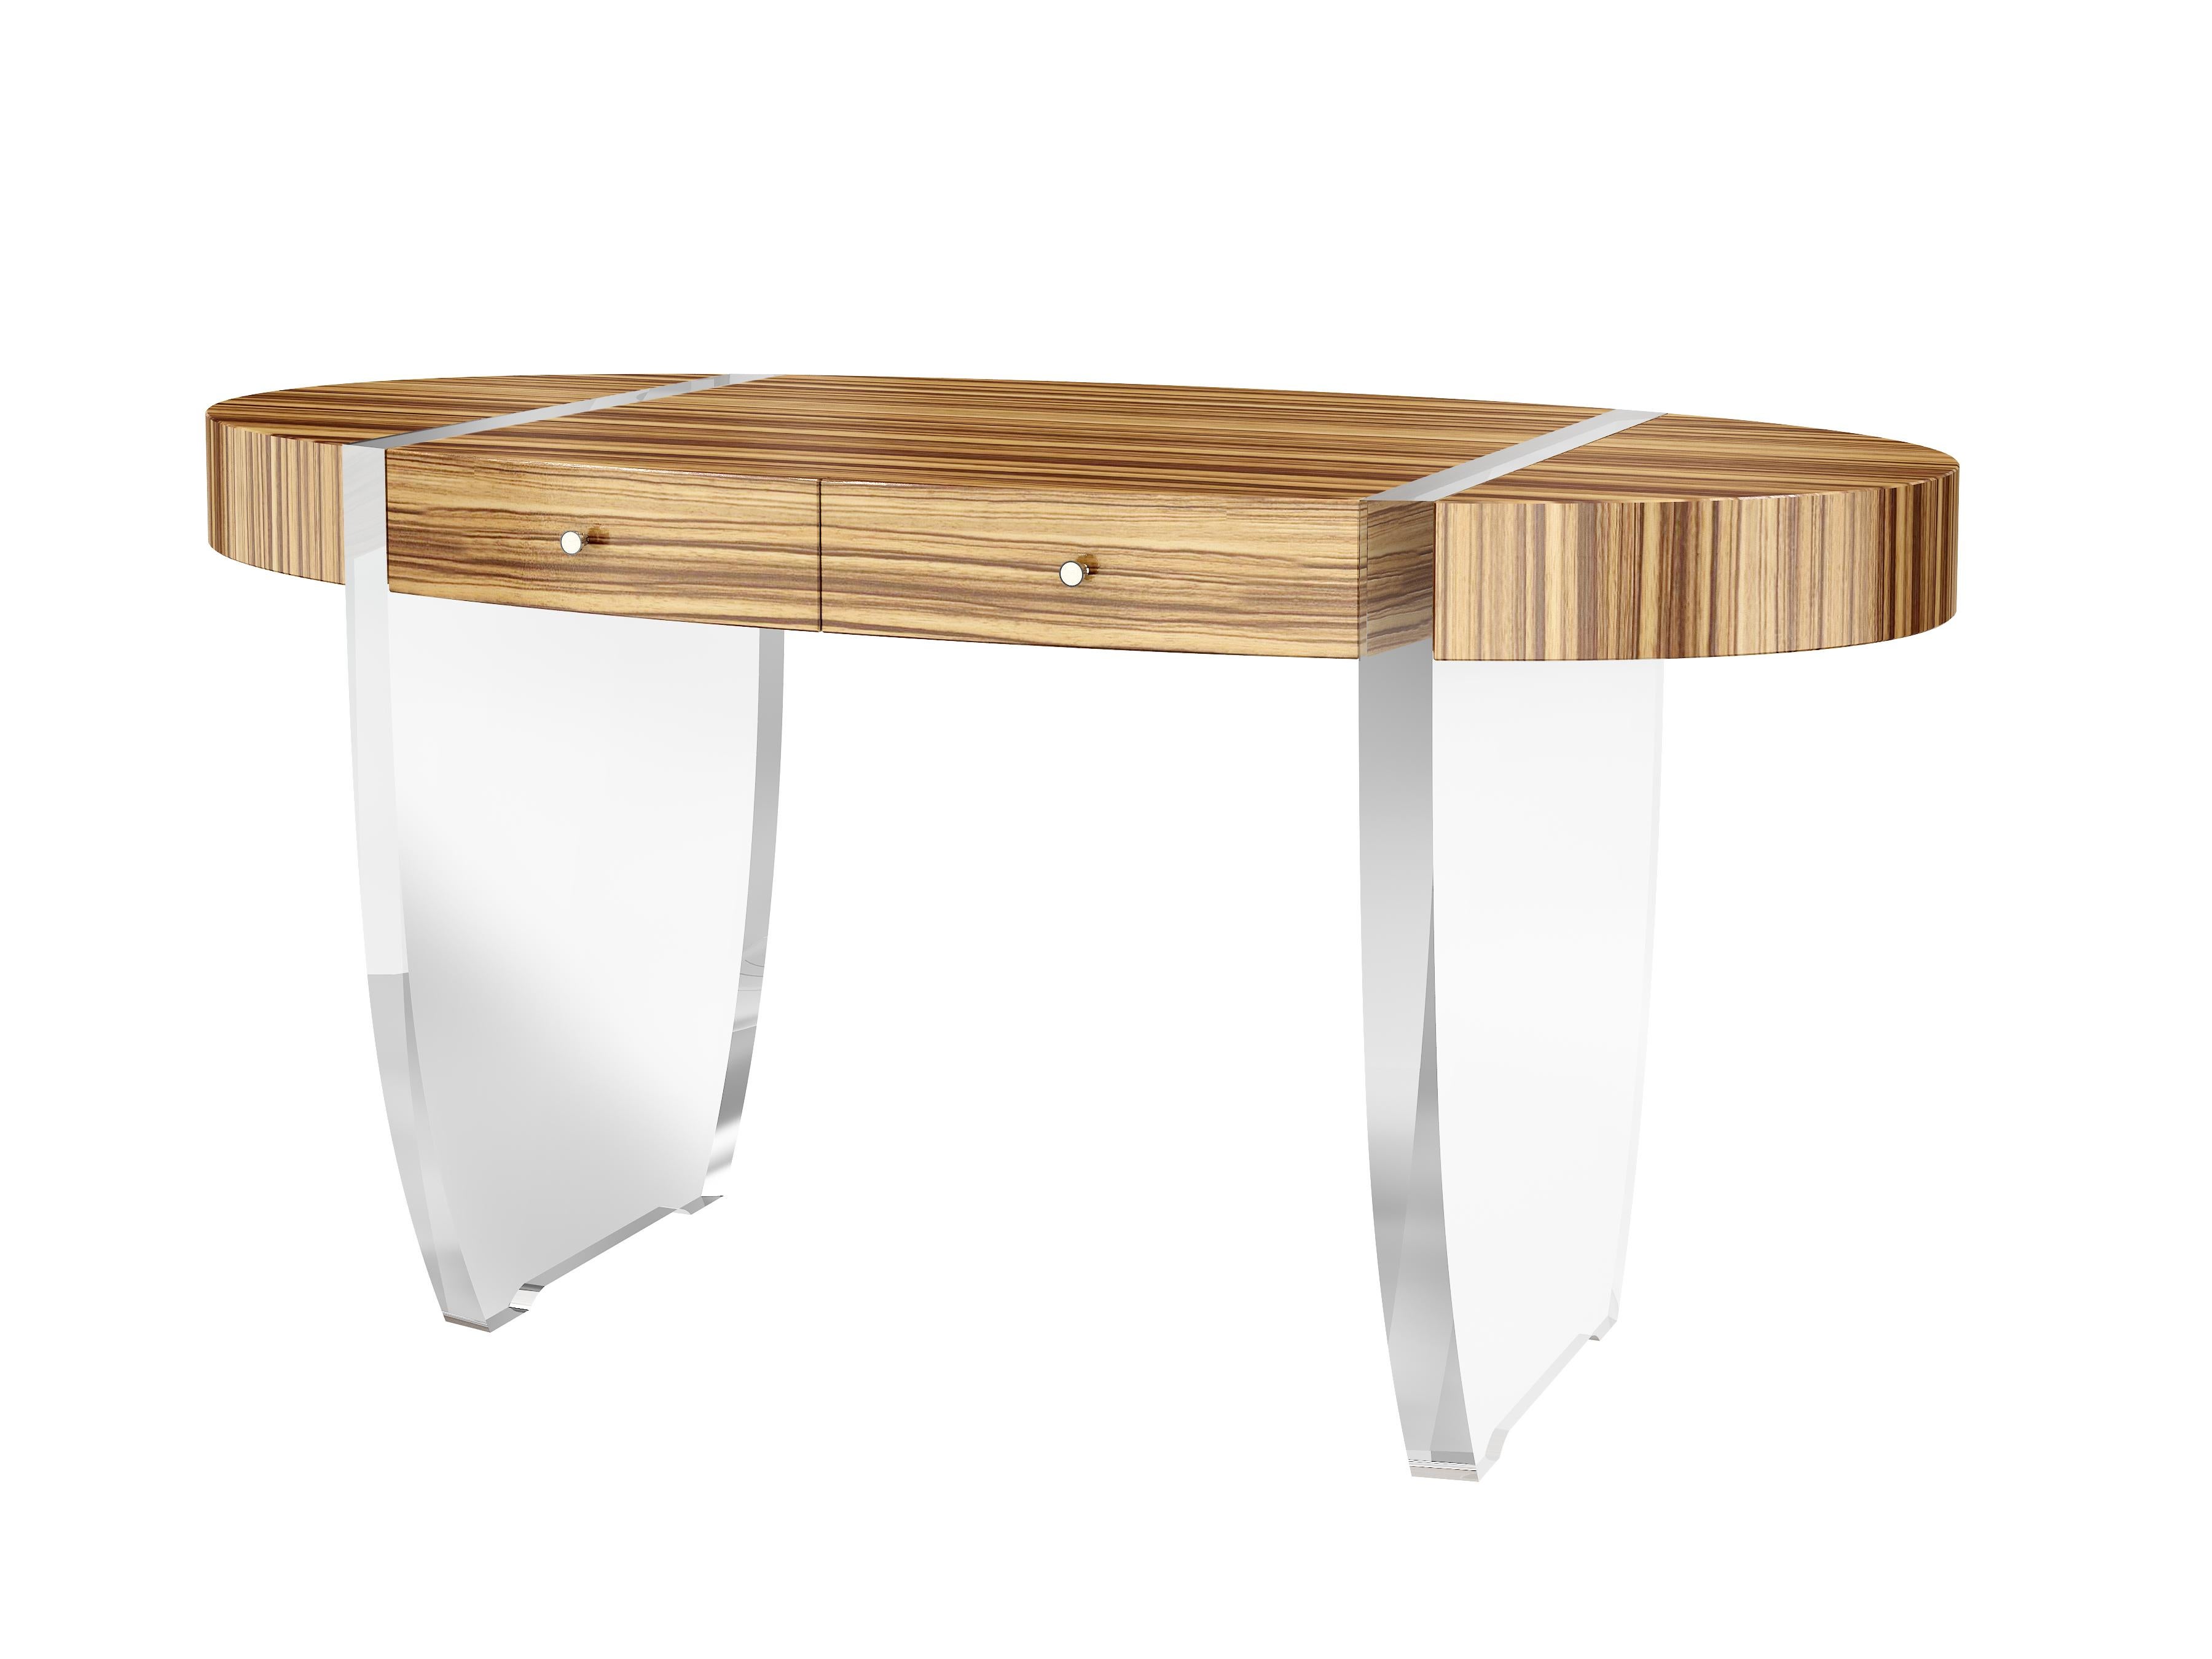 Modern oval desk - an elegant modern classic designed by Jonathan Franc - the oval top over a conforming frieze with two drawers, each opening to wenge veneer fitted drawer box interior with cream colored ultra-suede lined pull out trays, all raised